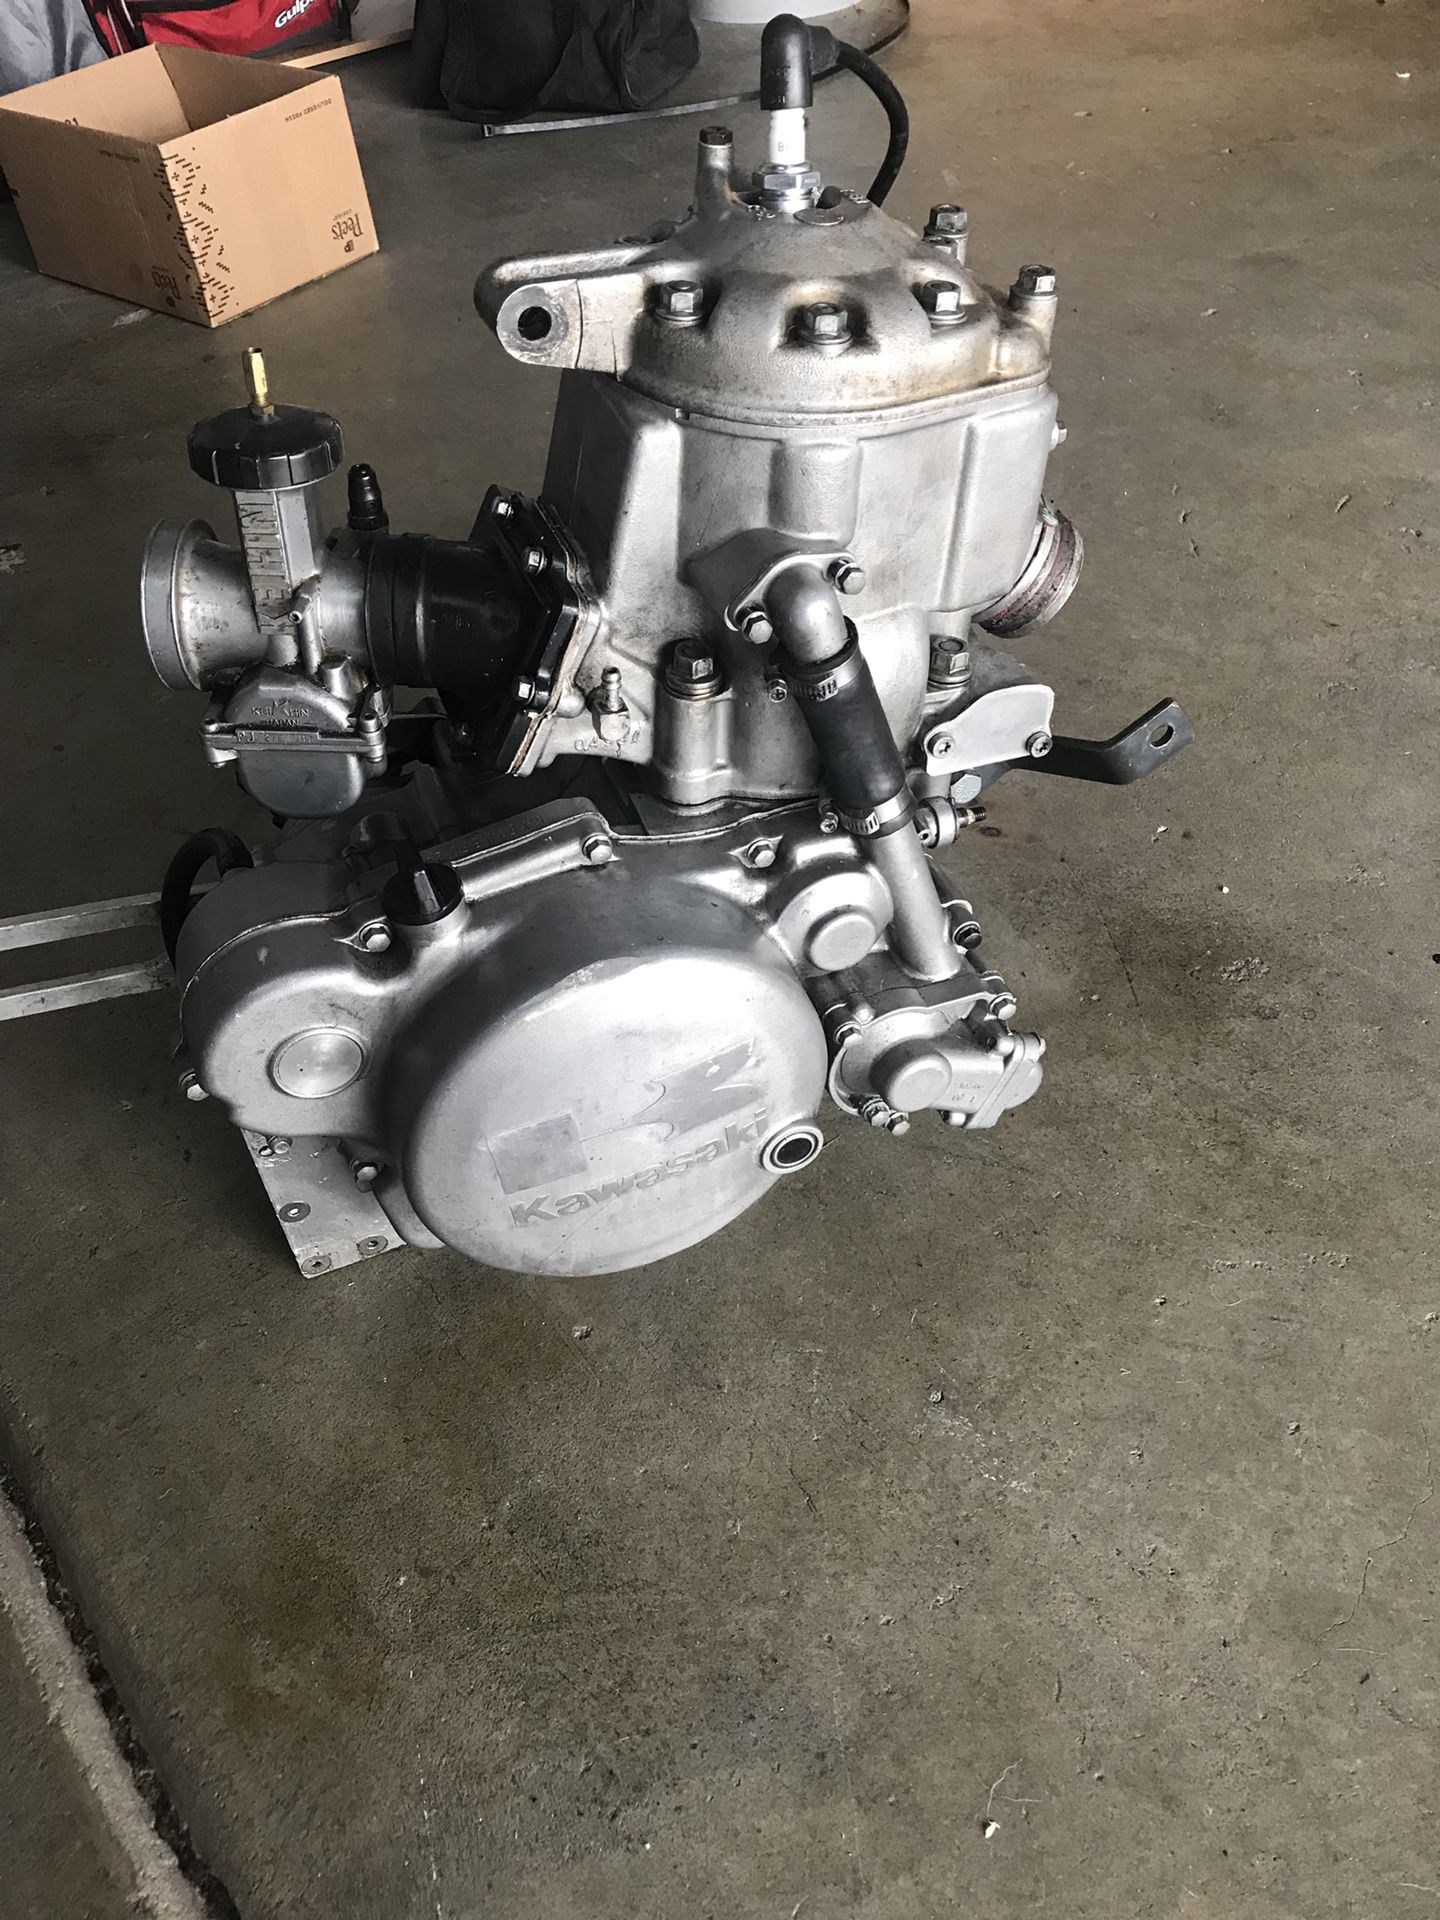 1995 Kx 500 engine for Sale in Dixon, - OfferUp